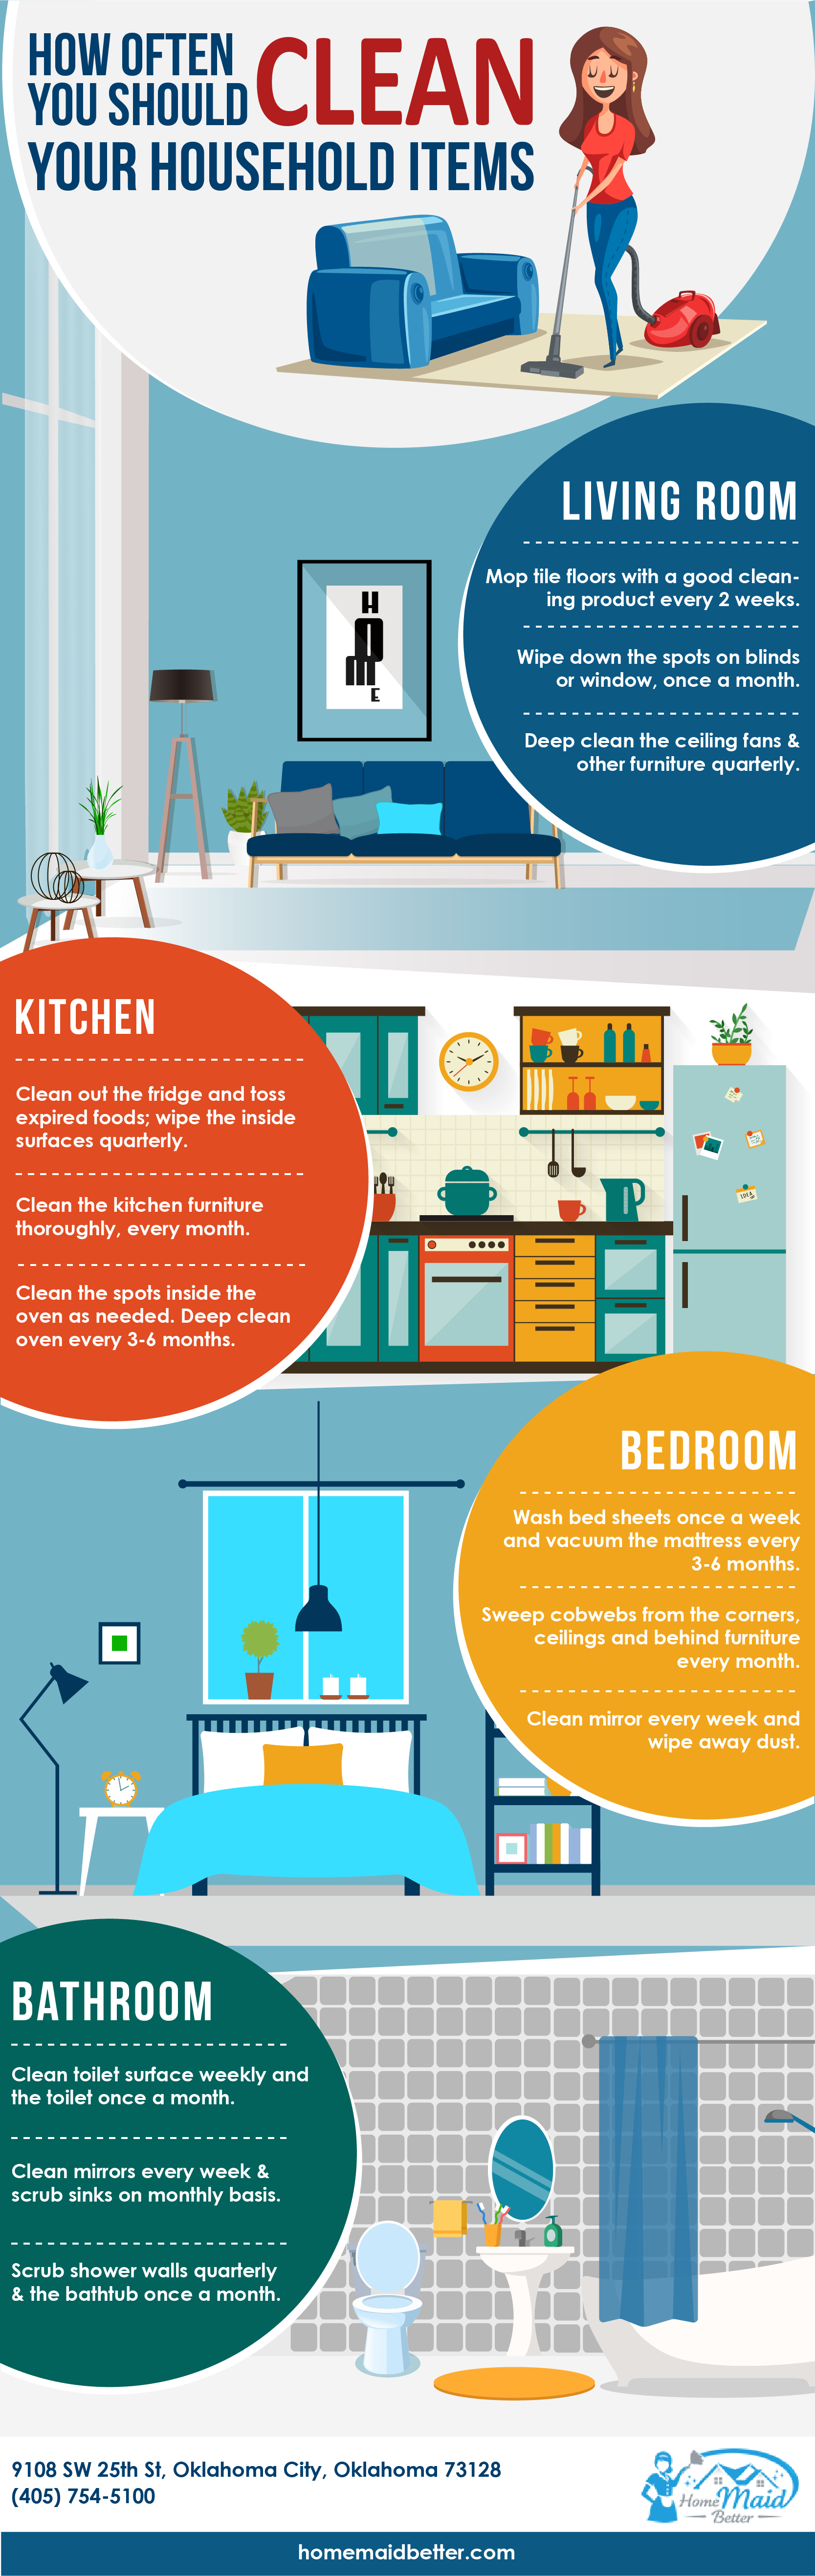 cleaning household items image